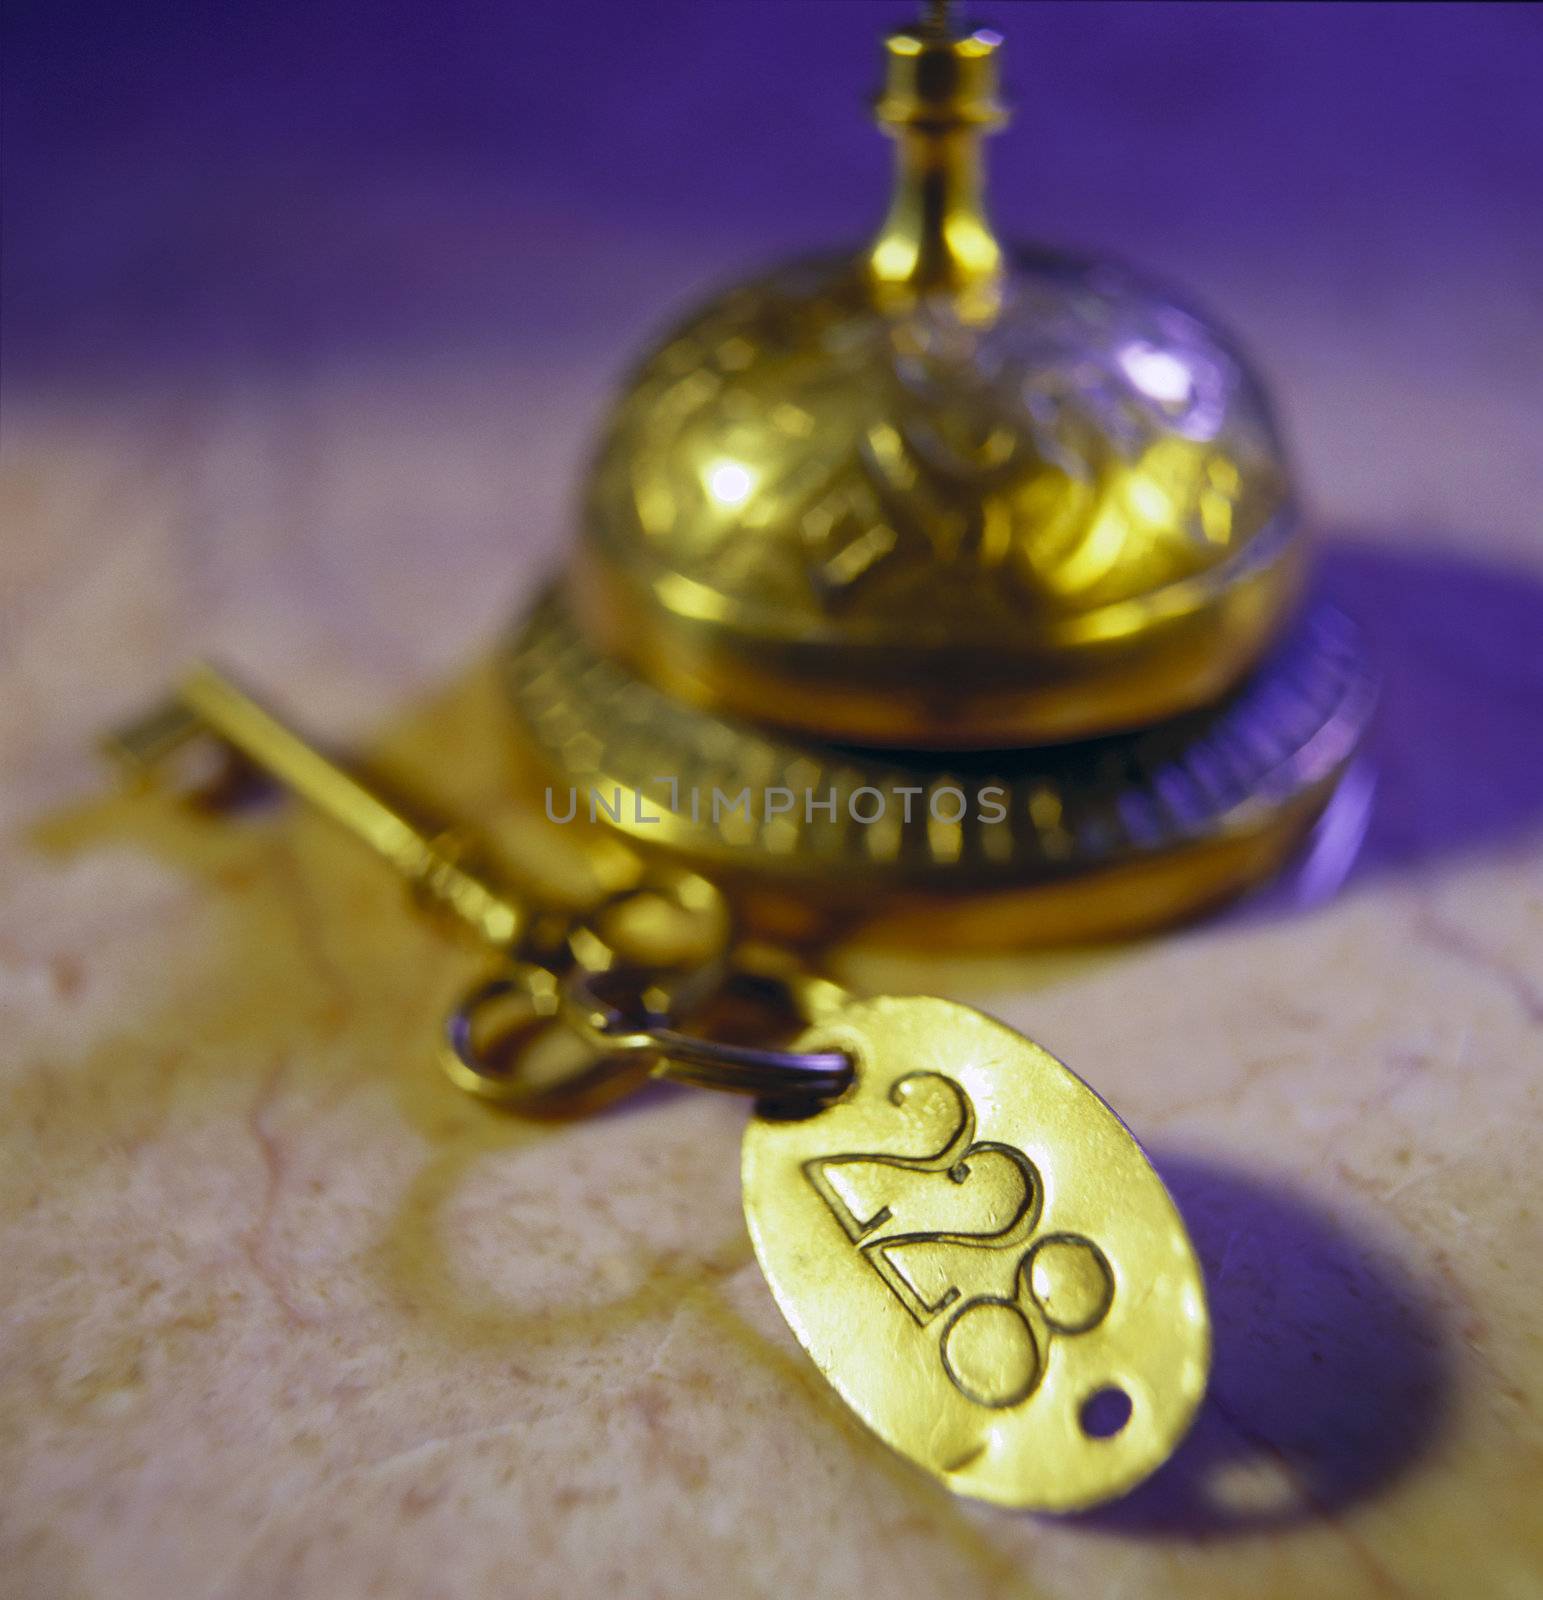 Front Desk Bell and Room Key by photo_guru